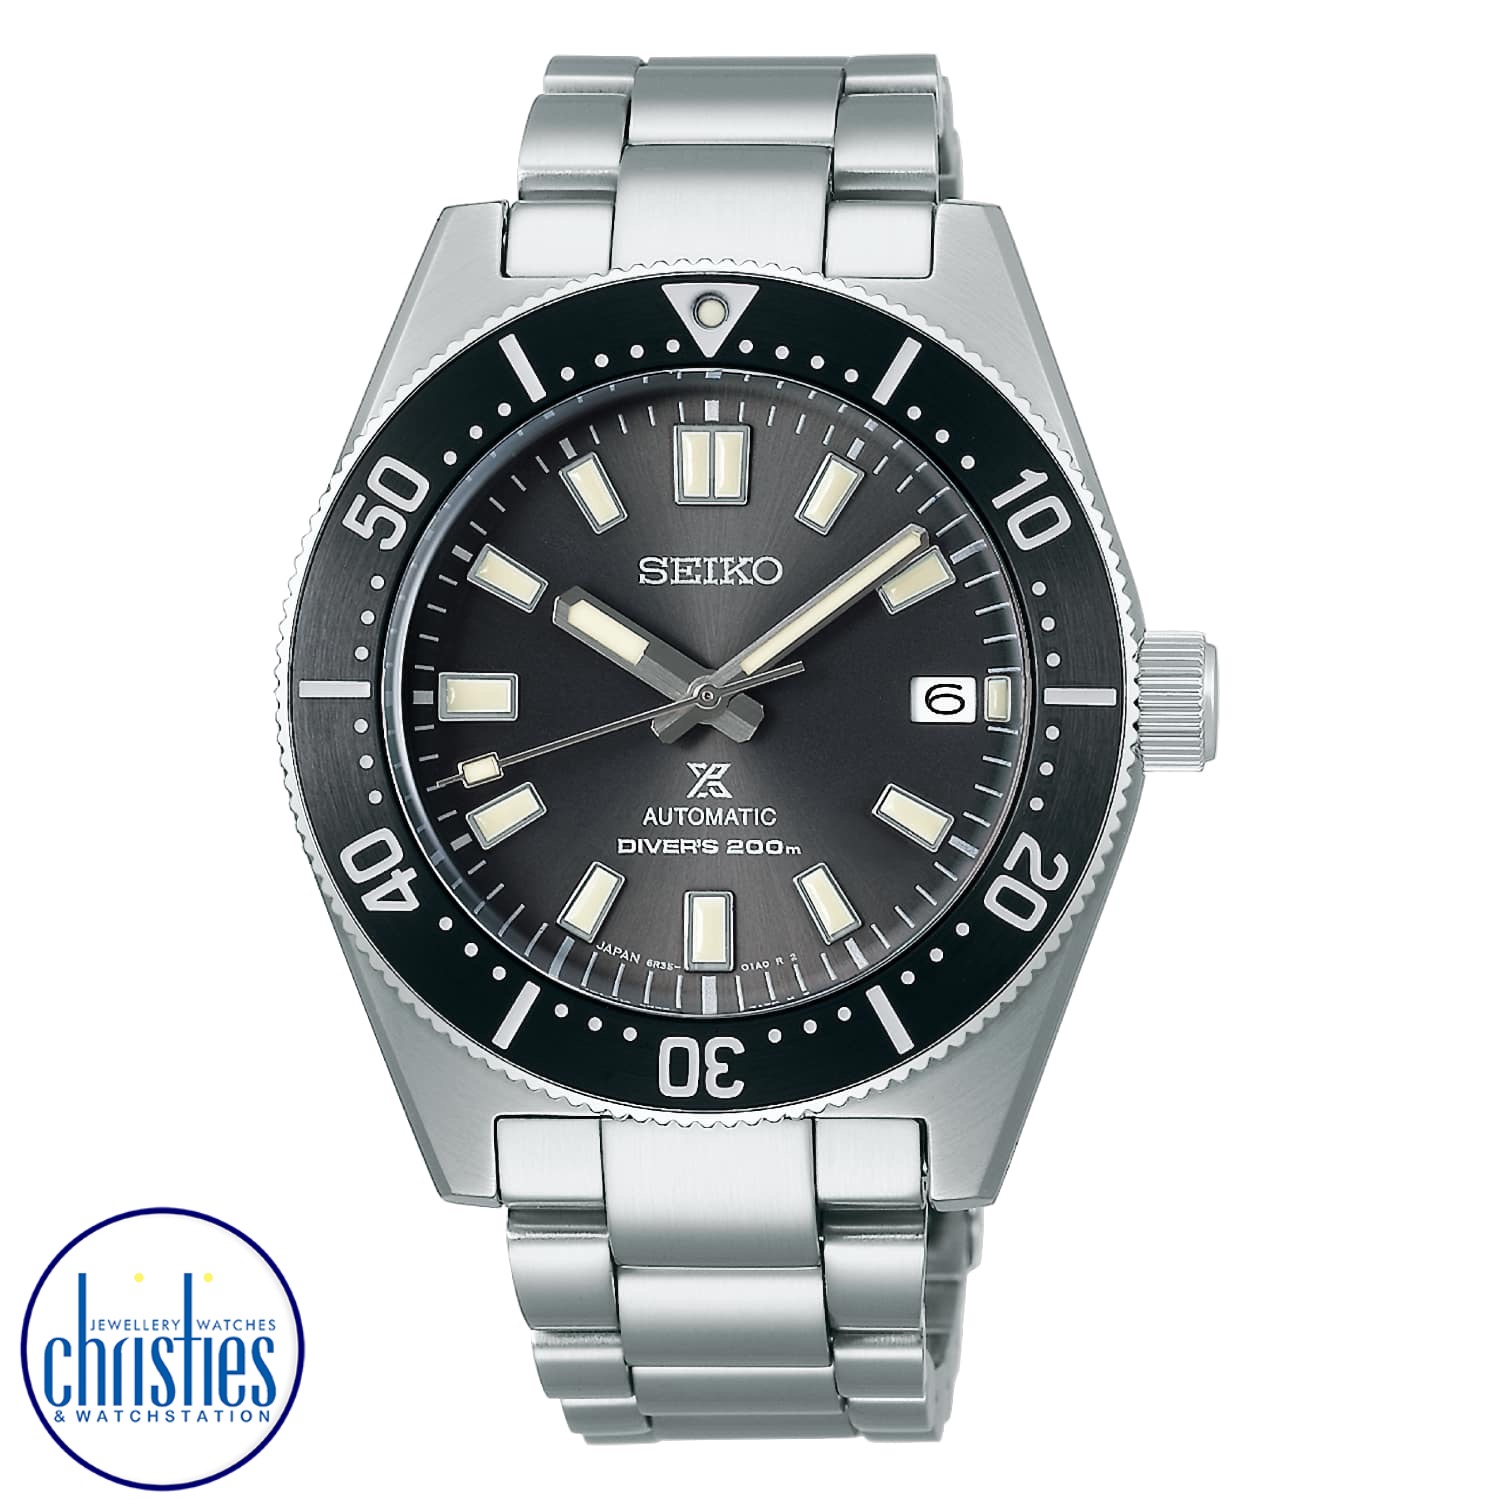 SPB143J1 SEIKO Prospex Automatic Divers Watch. Seiko Prospex challenges every limit, with a collection of timepieces for sports lovers and adventure seekers whether in the water, in the sky or on land. Since launching Japan’s first diver’s watch in 1965, 